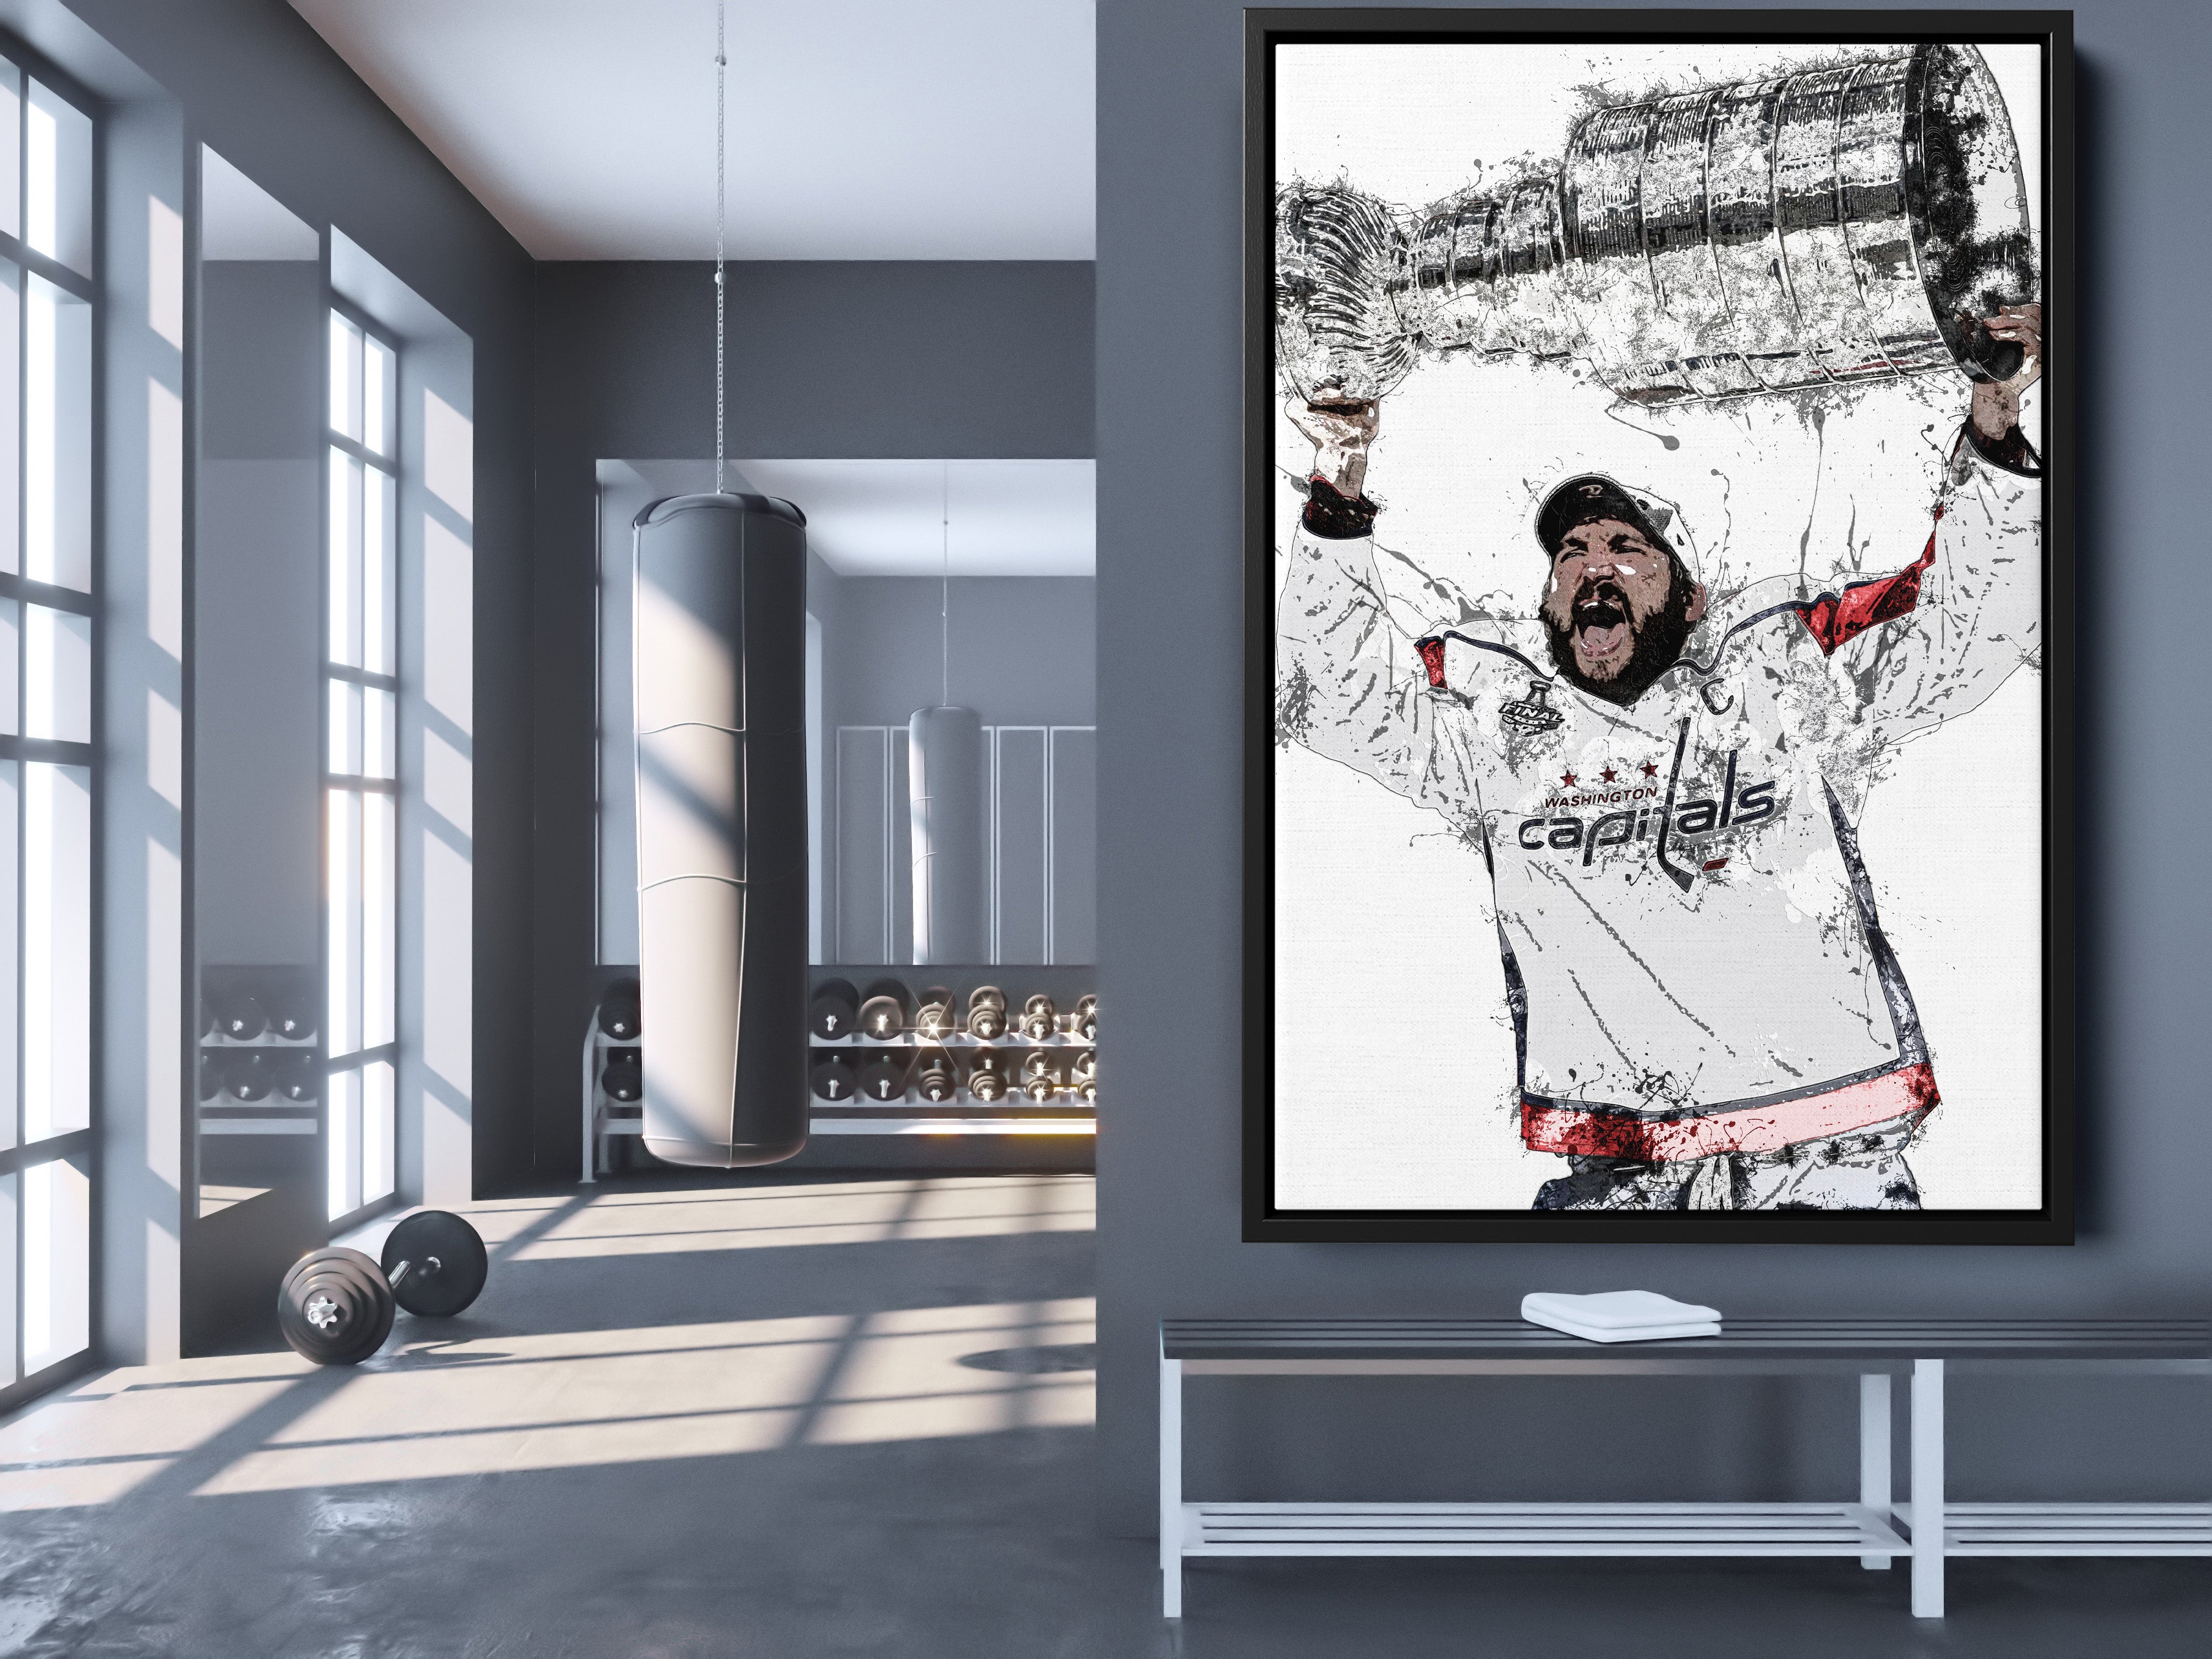 Washington Capitals: Alex Ovechkin 2021 Poster - NHL Removable Adhesive Wall Decal XL